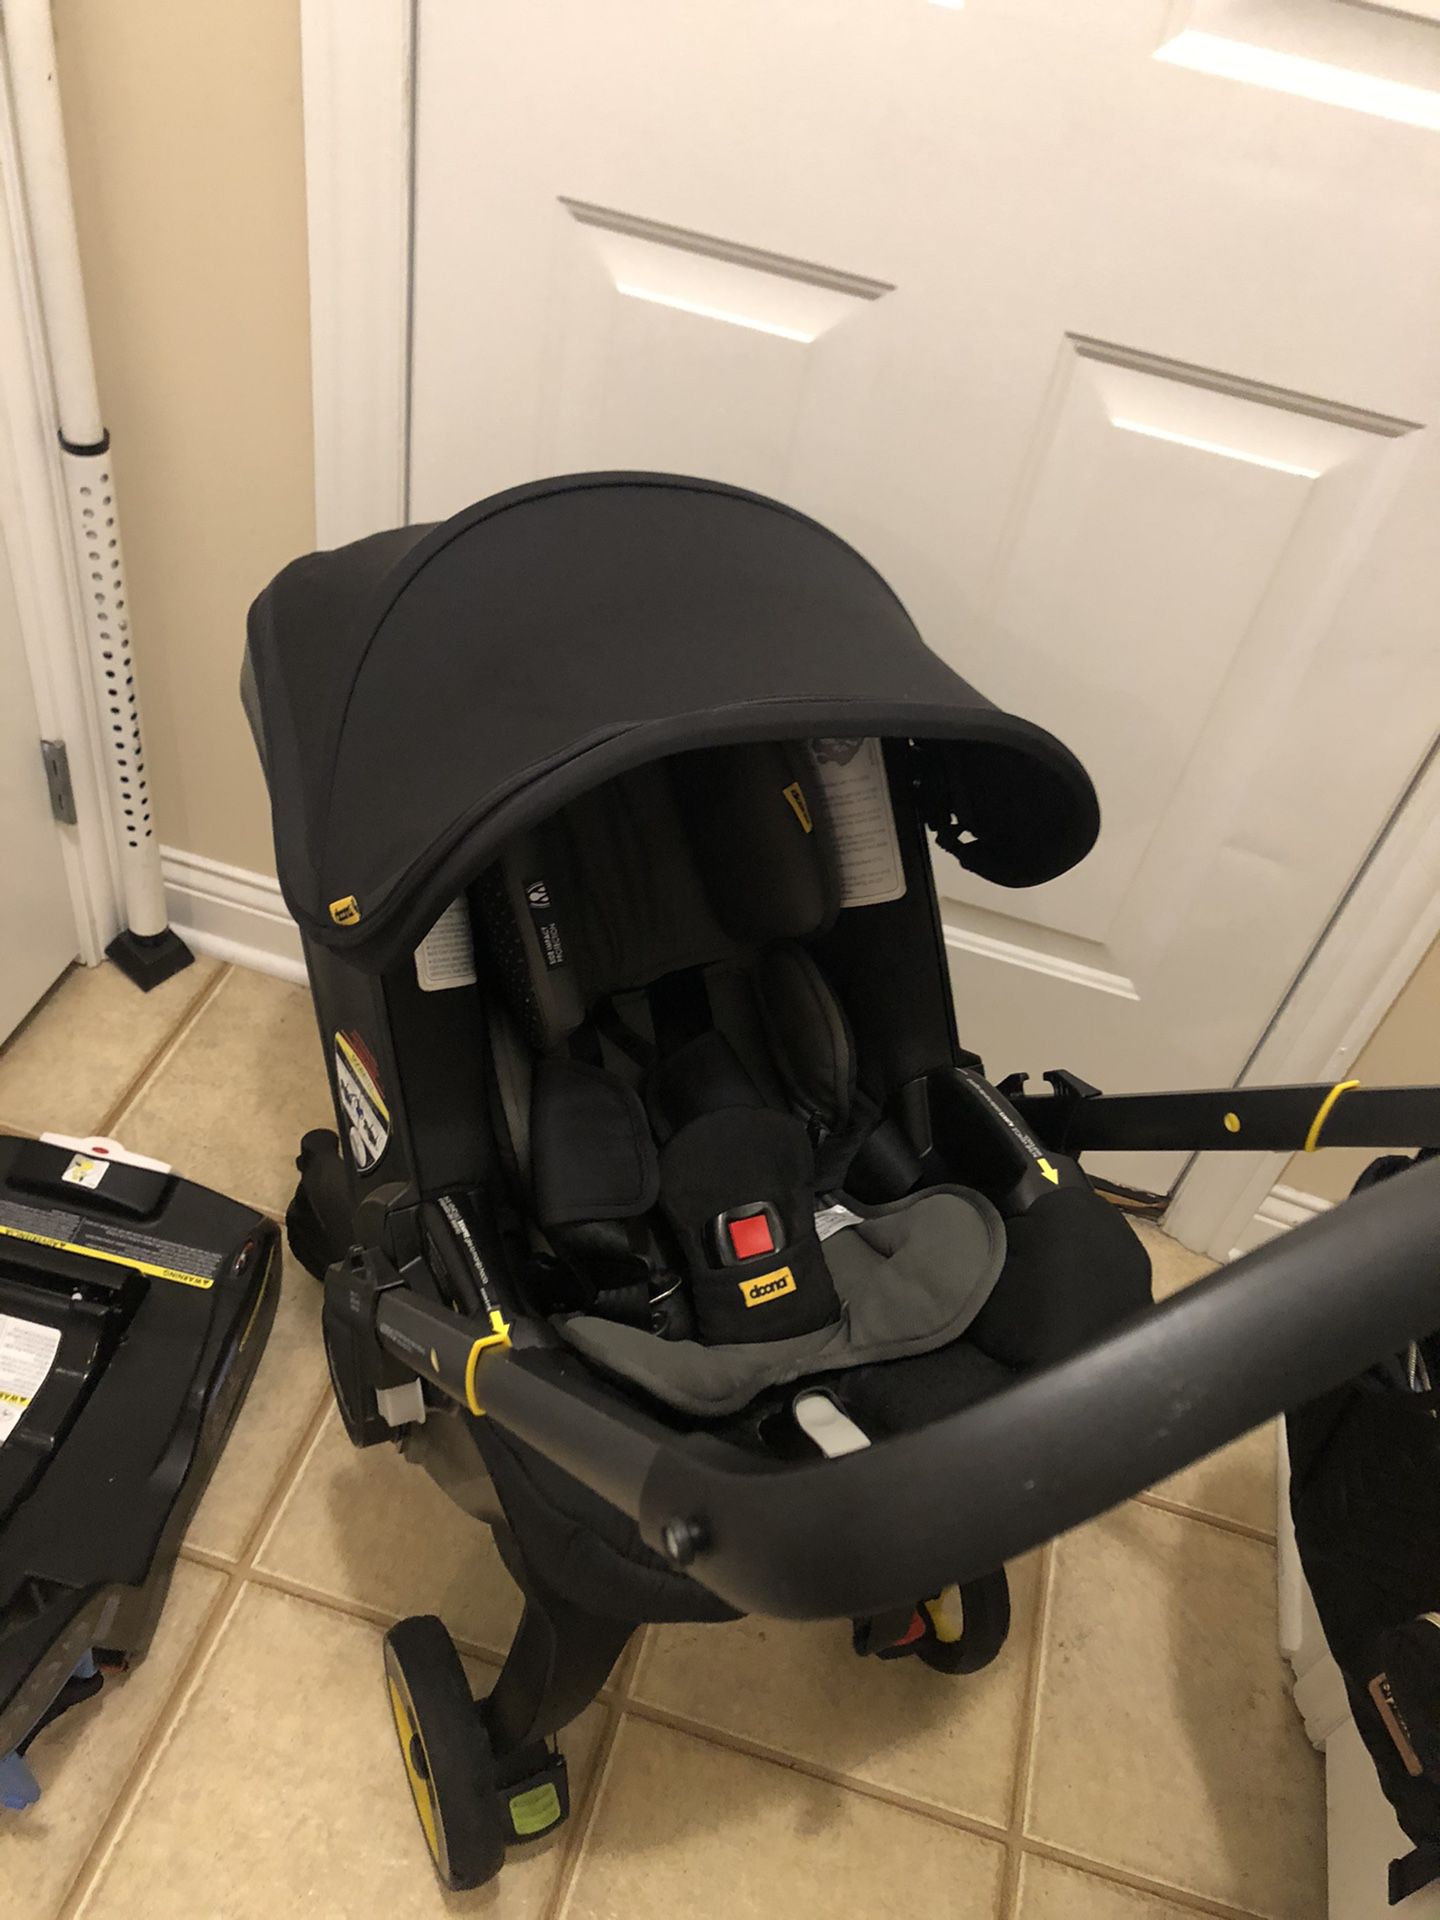 Donna Car seat and stroller